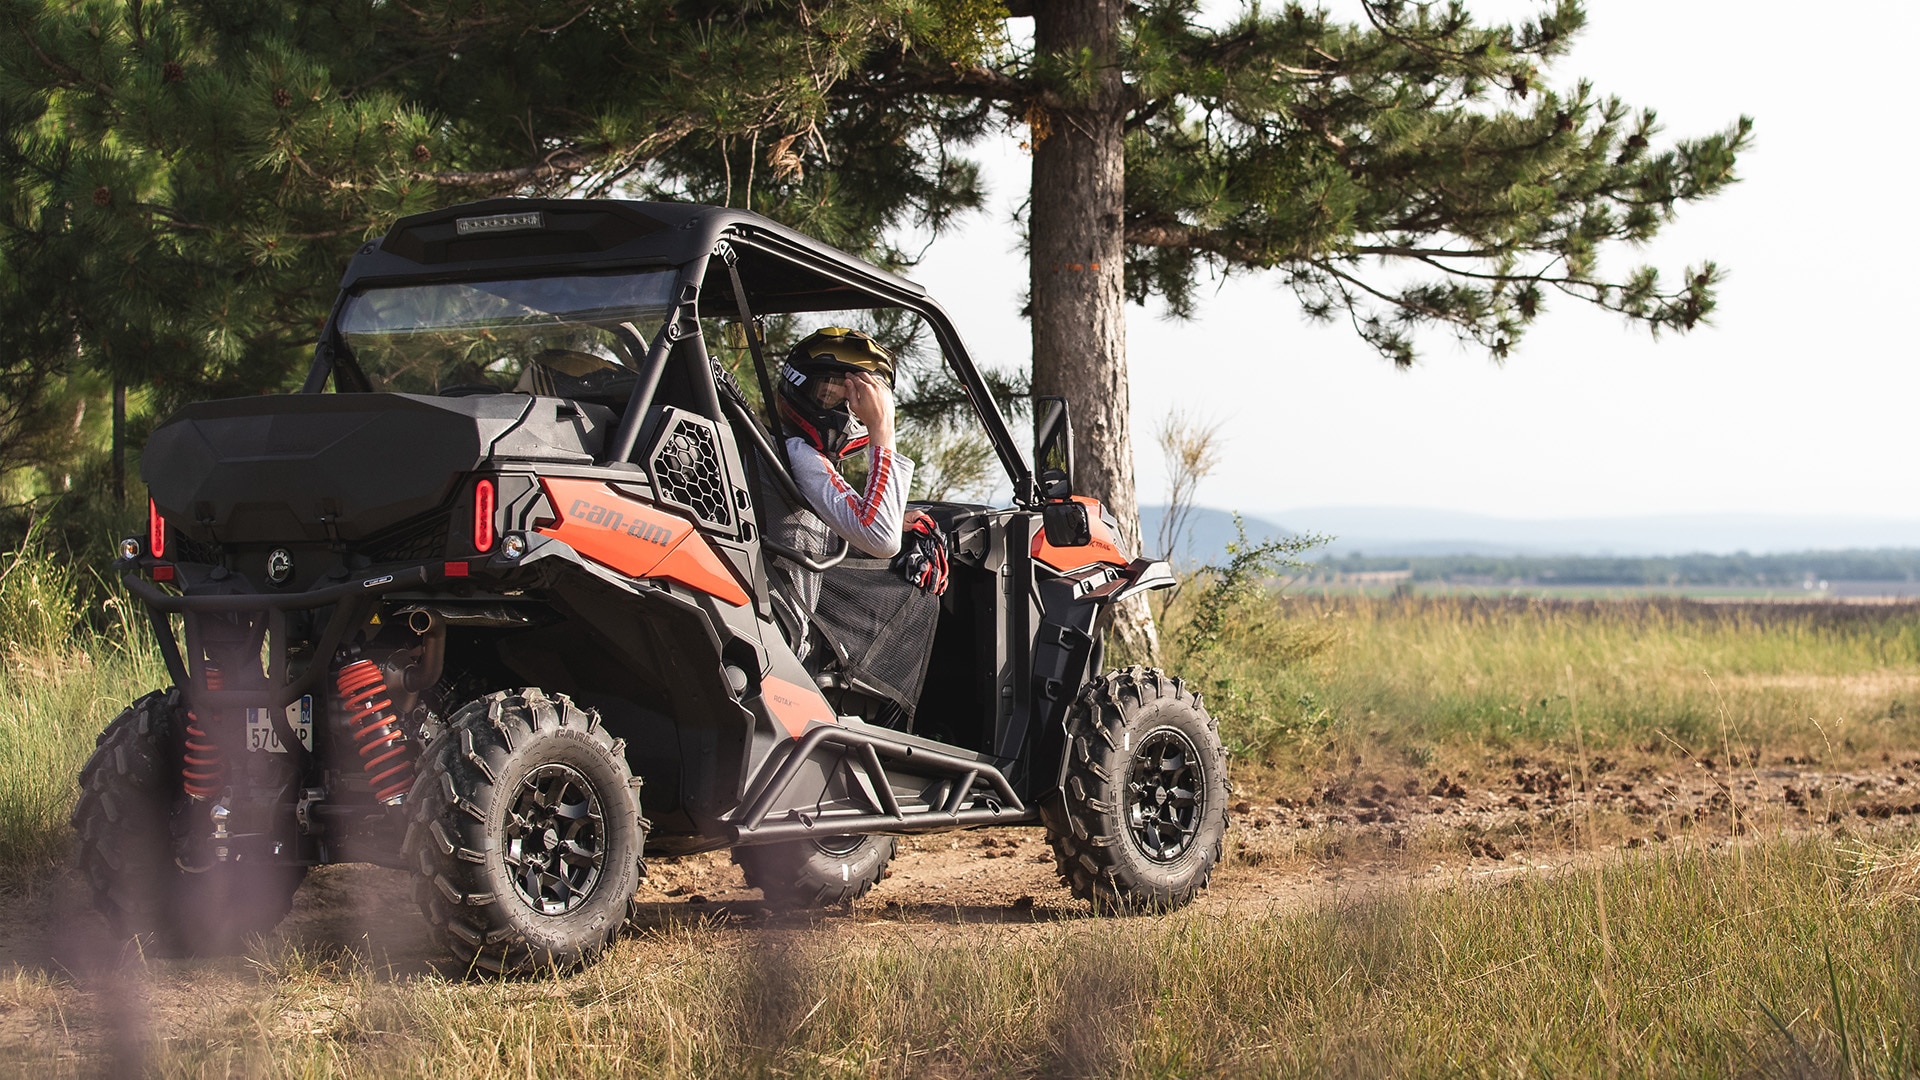 Riders taking a break from their adventure in a Can-Am Maverick Trail side-by-side vehicle